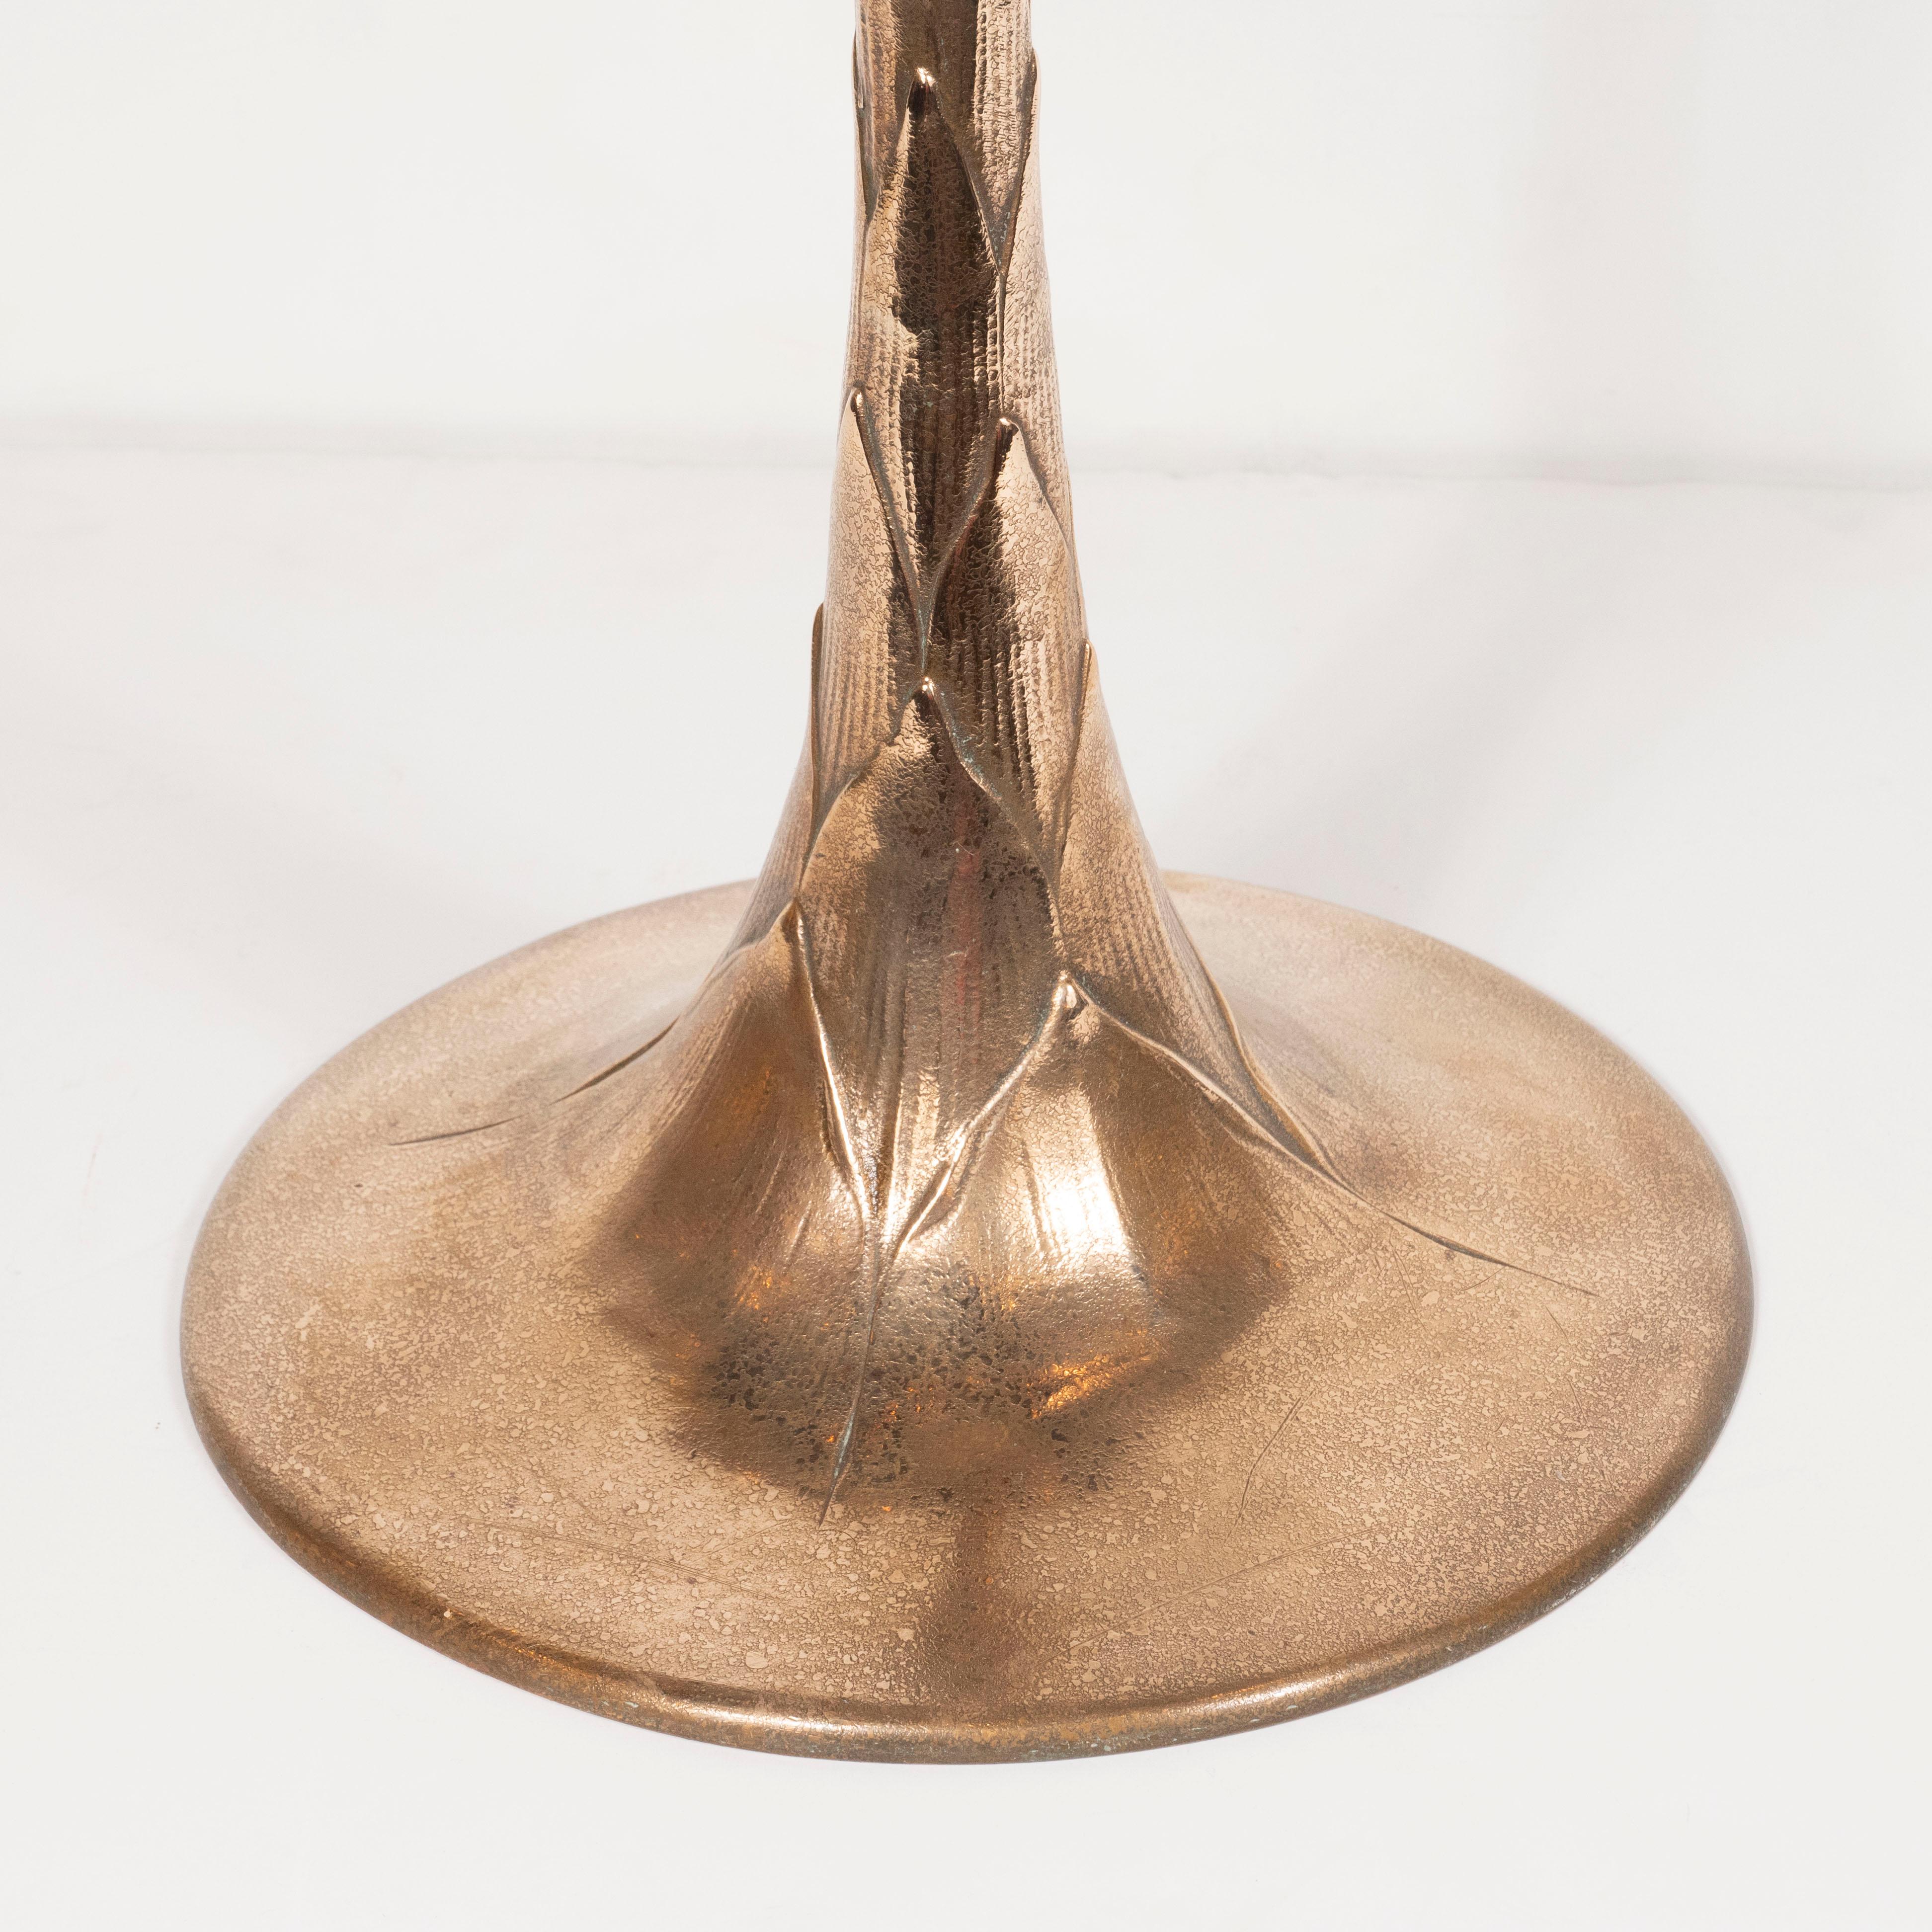 This beautiful standing bronze ash tray was realized by the fabled American design firm, Tiffany & Co. (then Tiffany Studios), in the United States circa 1905. The piece features a circular base that tapers as it ascends and offers a geometric